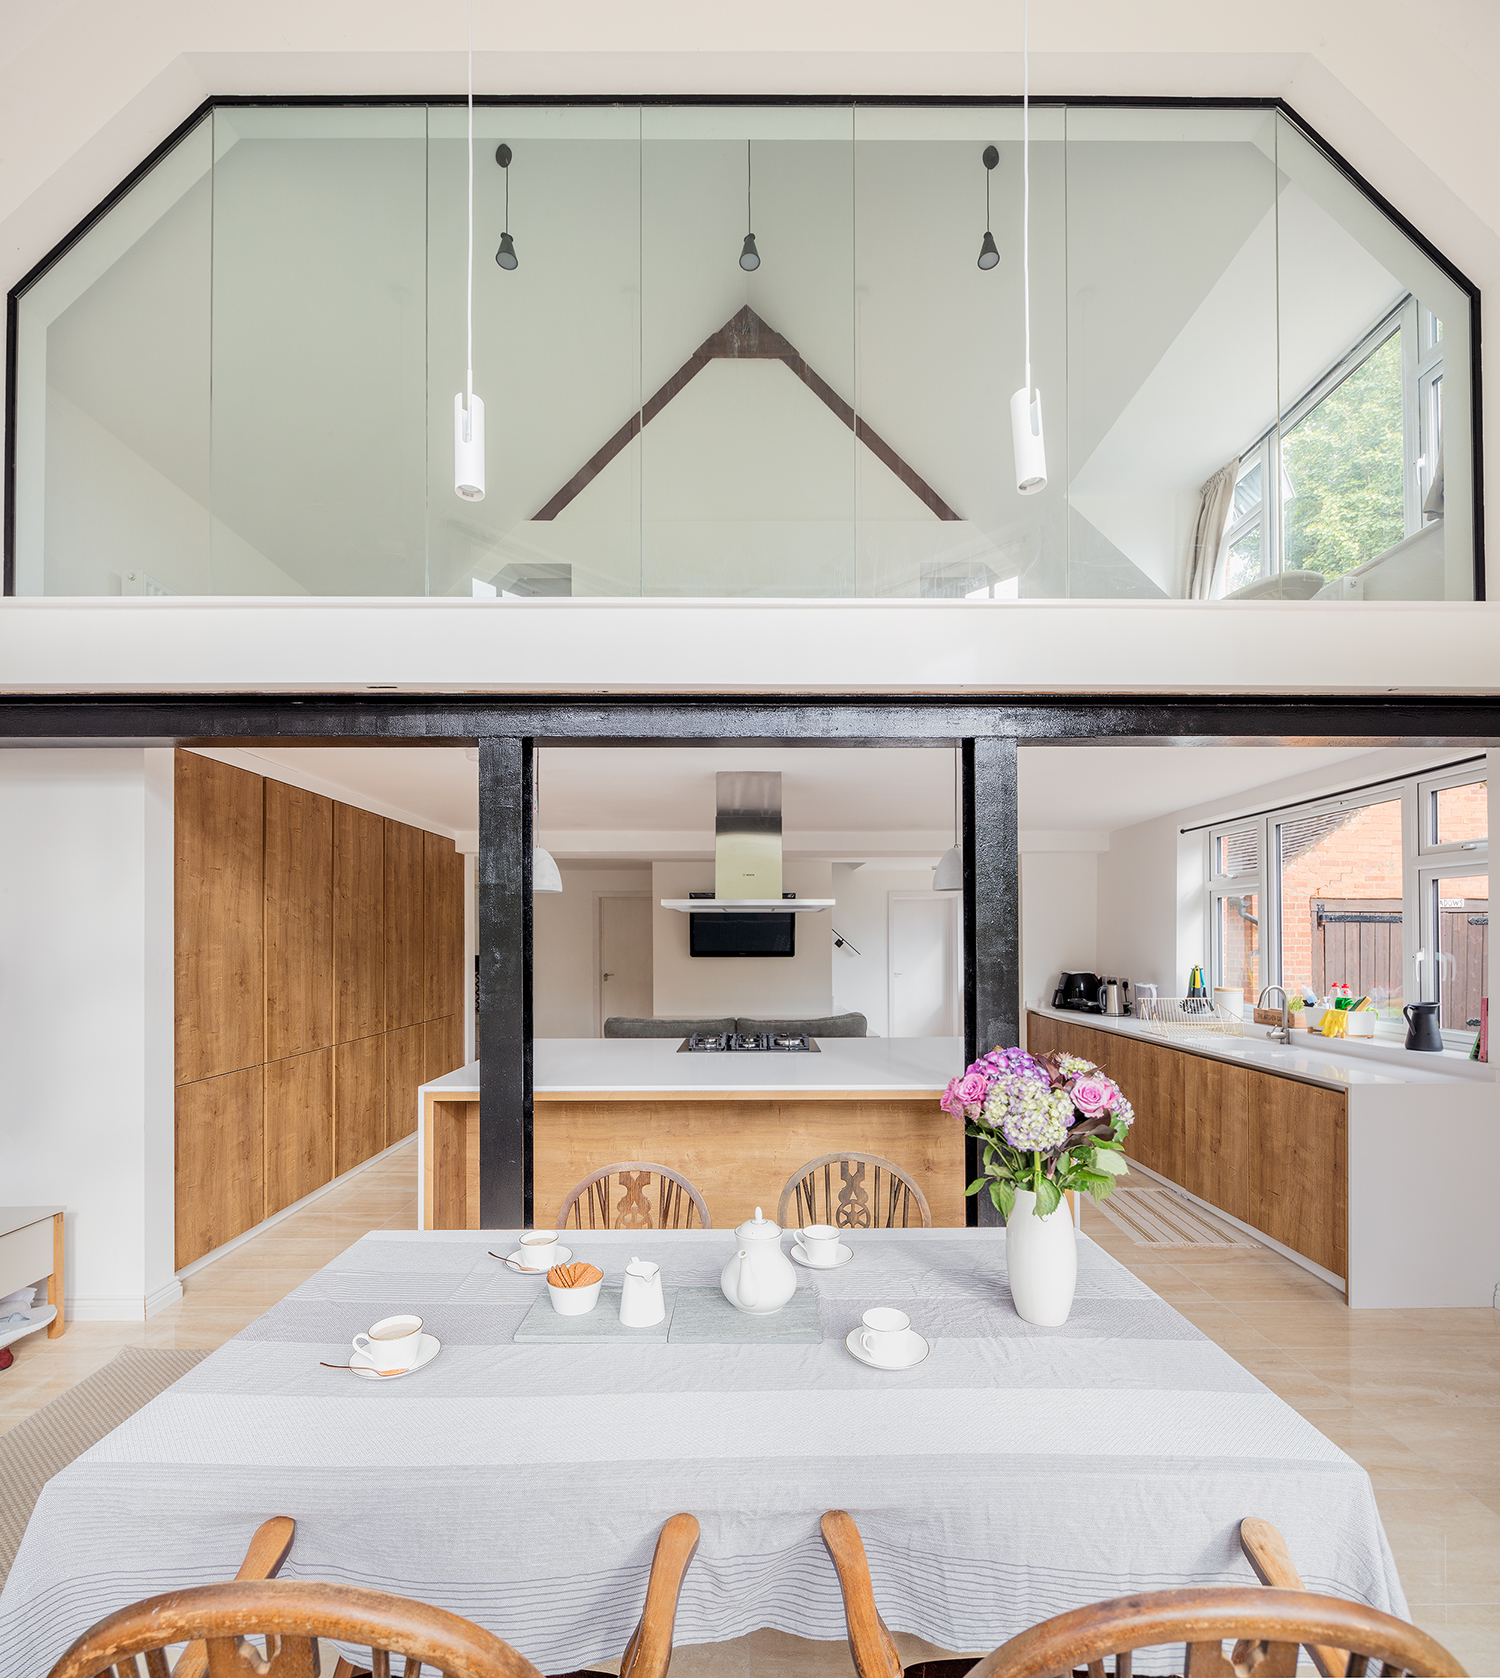 </p> <p>Find your ideal home design pro on designfor-me.com - get matched and see who's interested in your home project. Click image to see more inspiration from our design pros</p> <p>Design by Ben, architect from Mole Valley, South East</p> <p>#architecture #homedesign #modernhomes #homeinspiration #kitchens #kitchendesign #kitcheninspiration #kitchenideas #kitchengoals #doubleheightspace</p> <p>